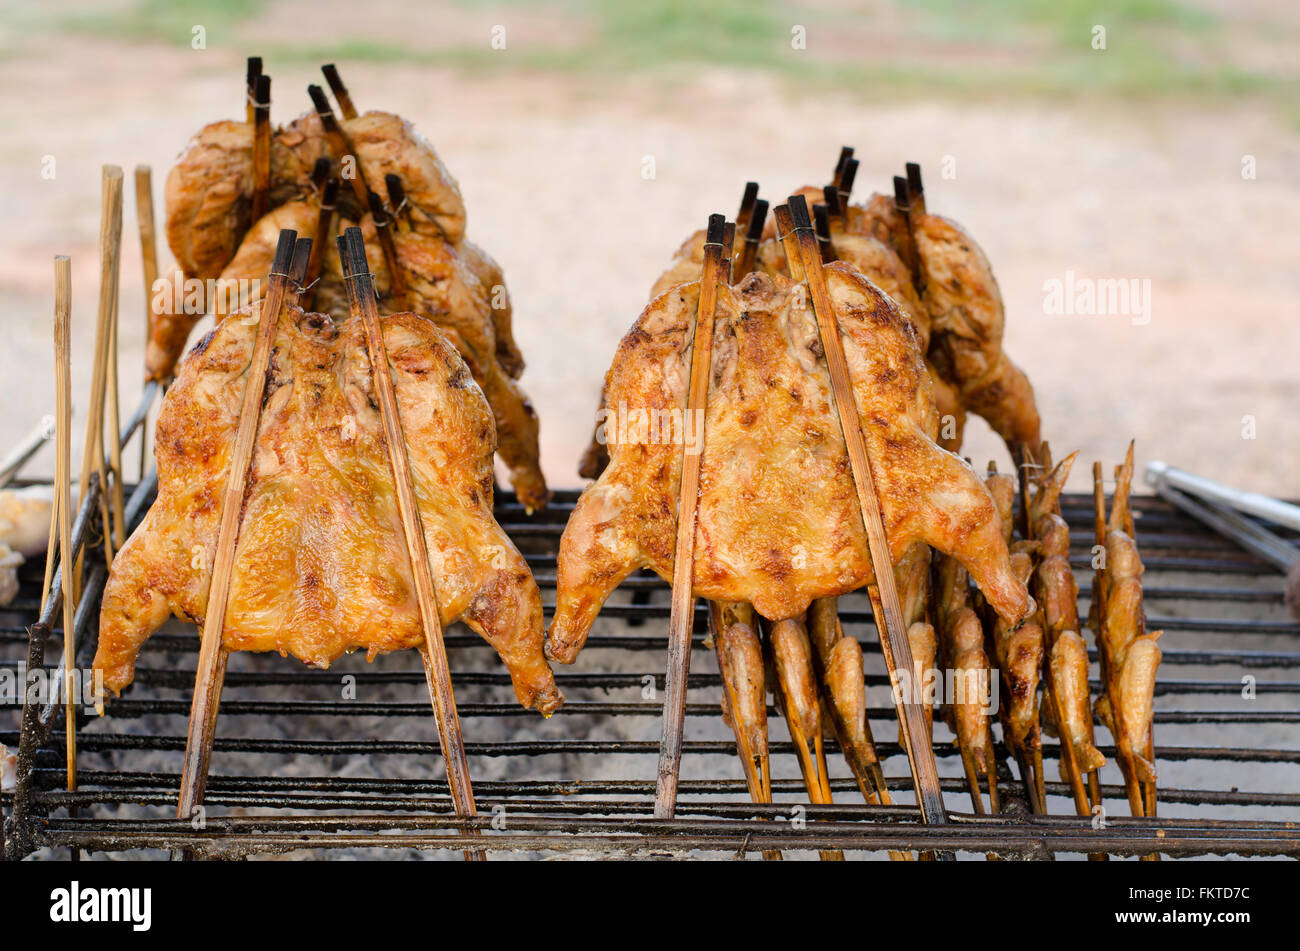 Thai-style chicken grilled on charcoal Stock Photo